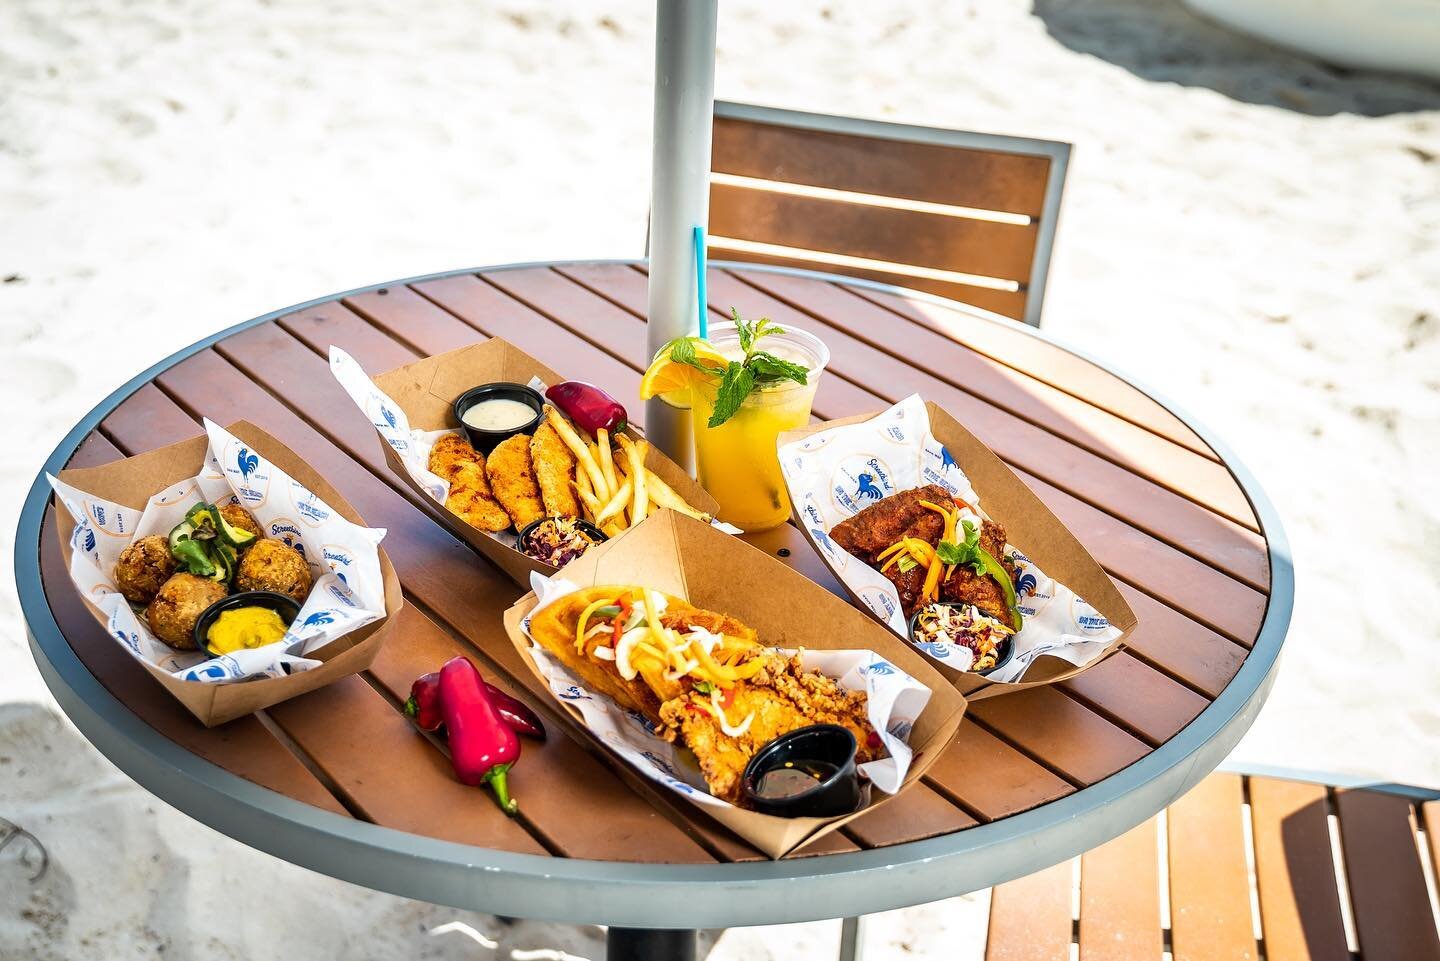 Our Streetbird on the Beach menu got a revamp, and it's delicious! 

If you're ever strolling on the beach in the Bahamas, stop by because where else can you find your Streetbird faves with a beautiful ocean view?! #streetbird #bahamas🇧🇸 #bahamarre